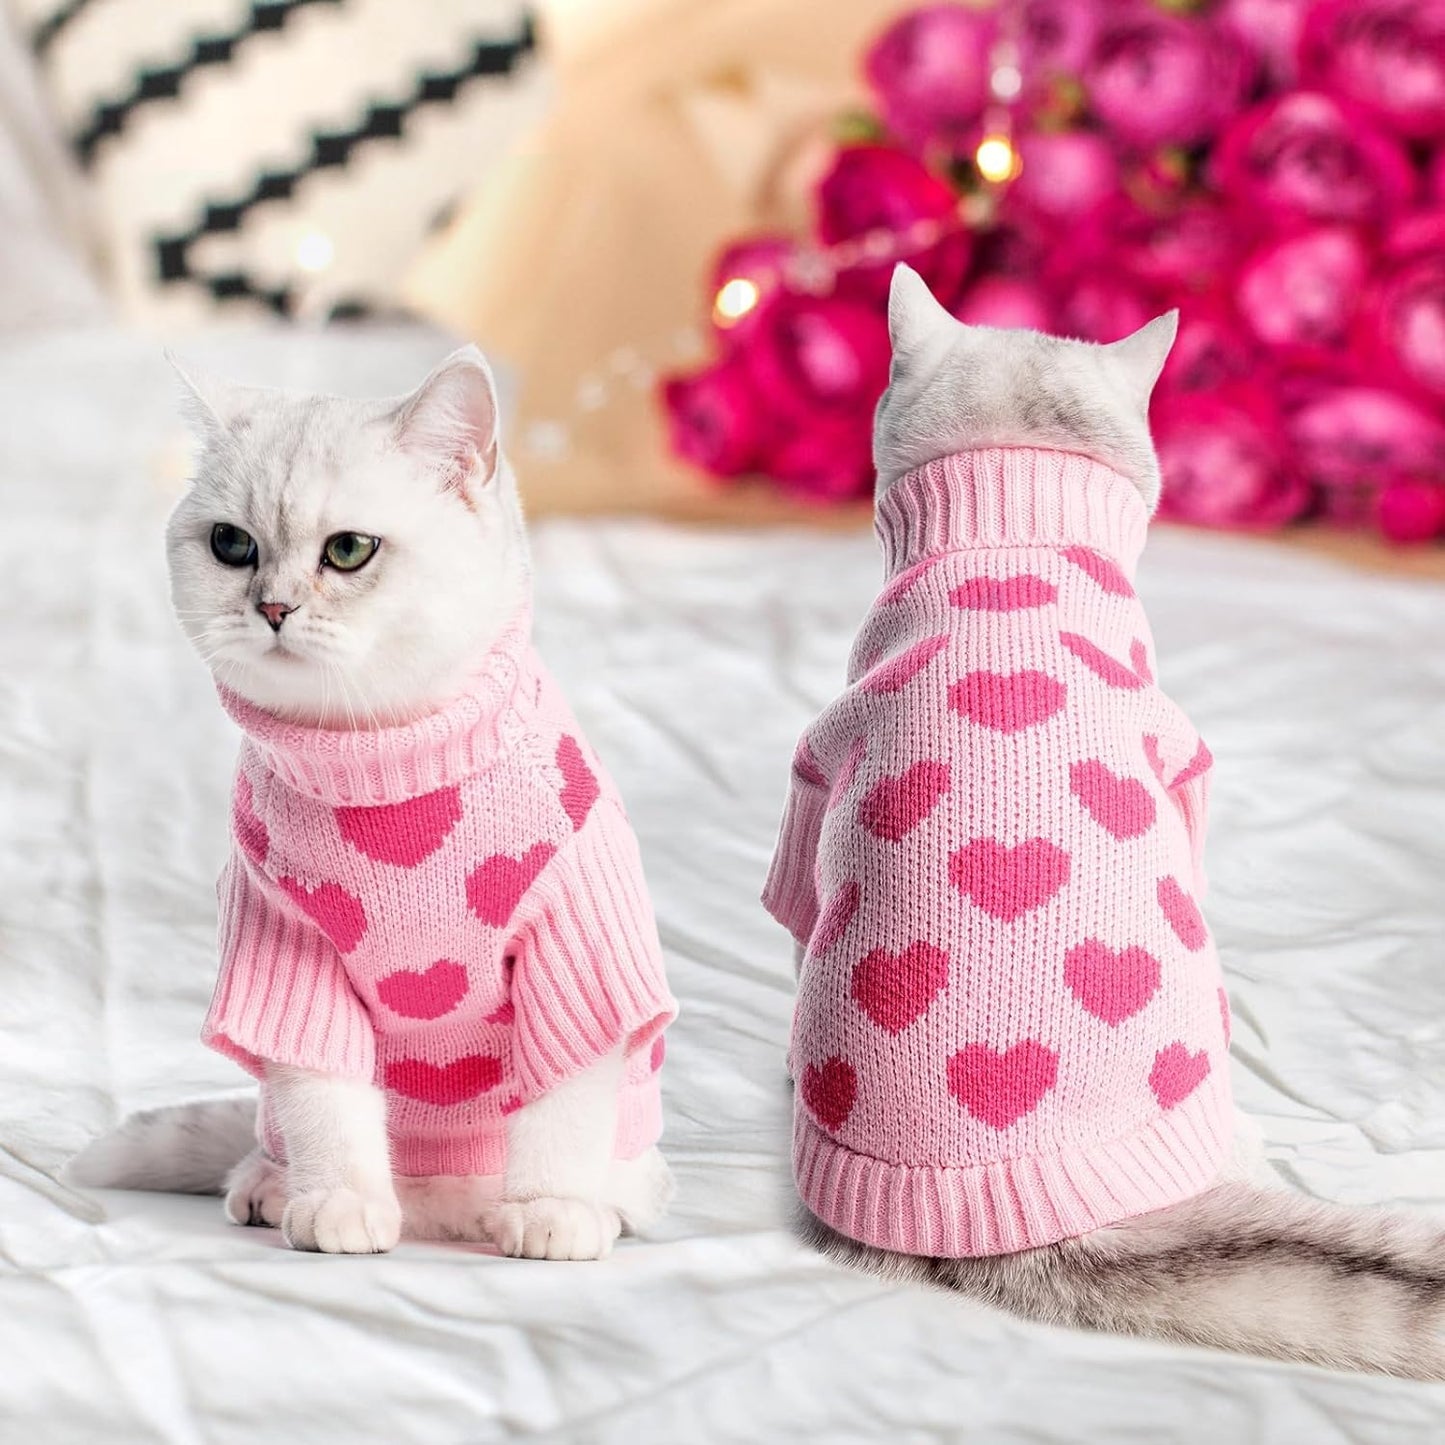 Valentine's Day Cat Sweater: Cozy Heart Pattern, Soft Knit, and Warm Turtleneck for Small Cats and Kittens in Pink.